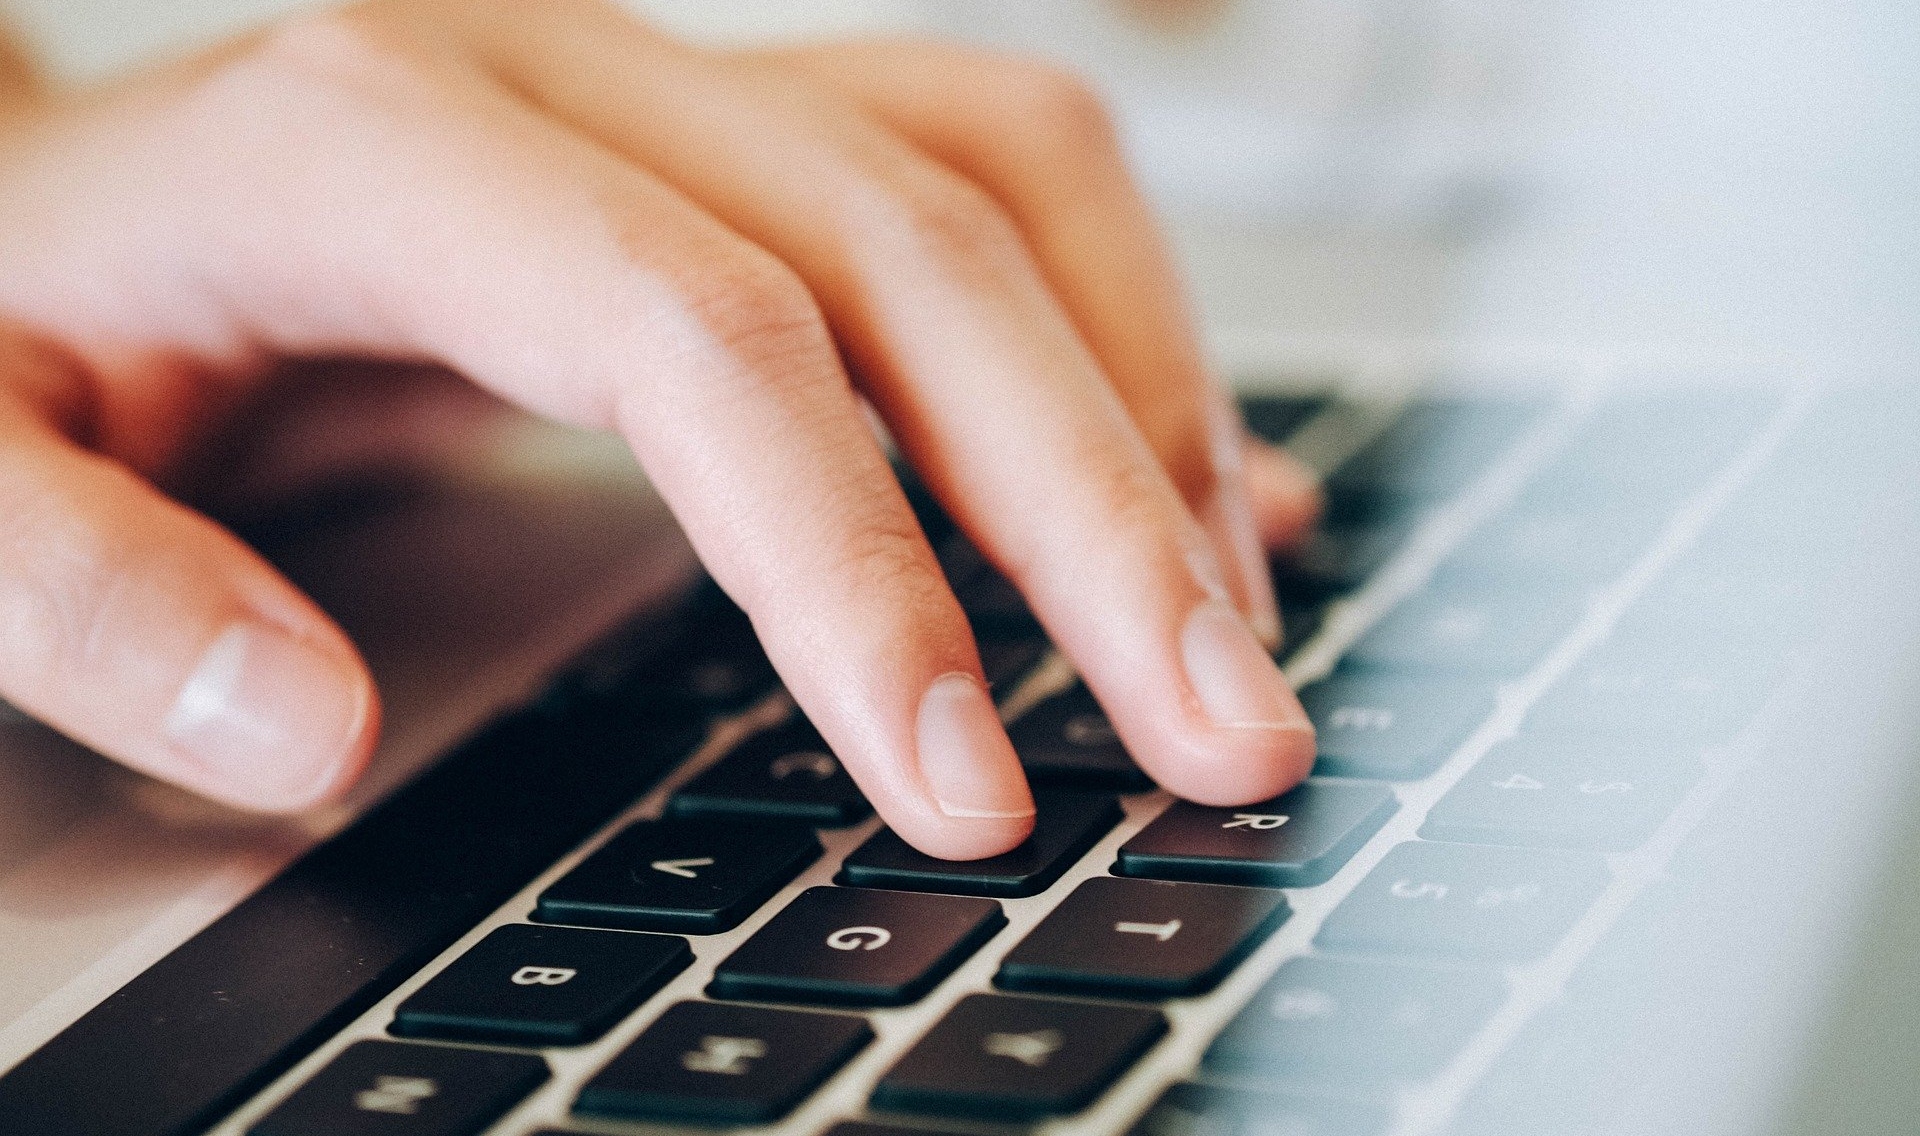 stock image of fingers typing on a computer keyboard